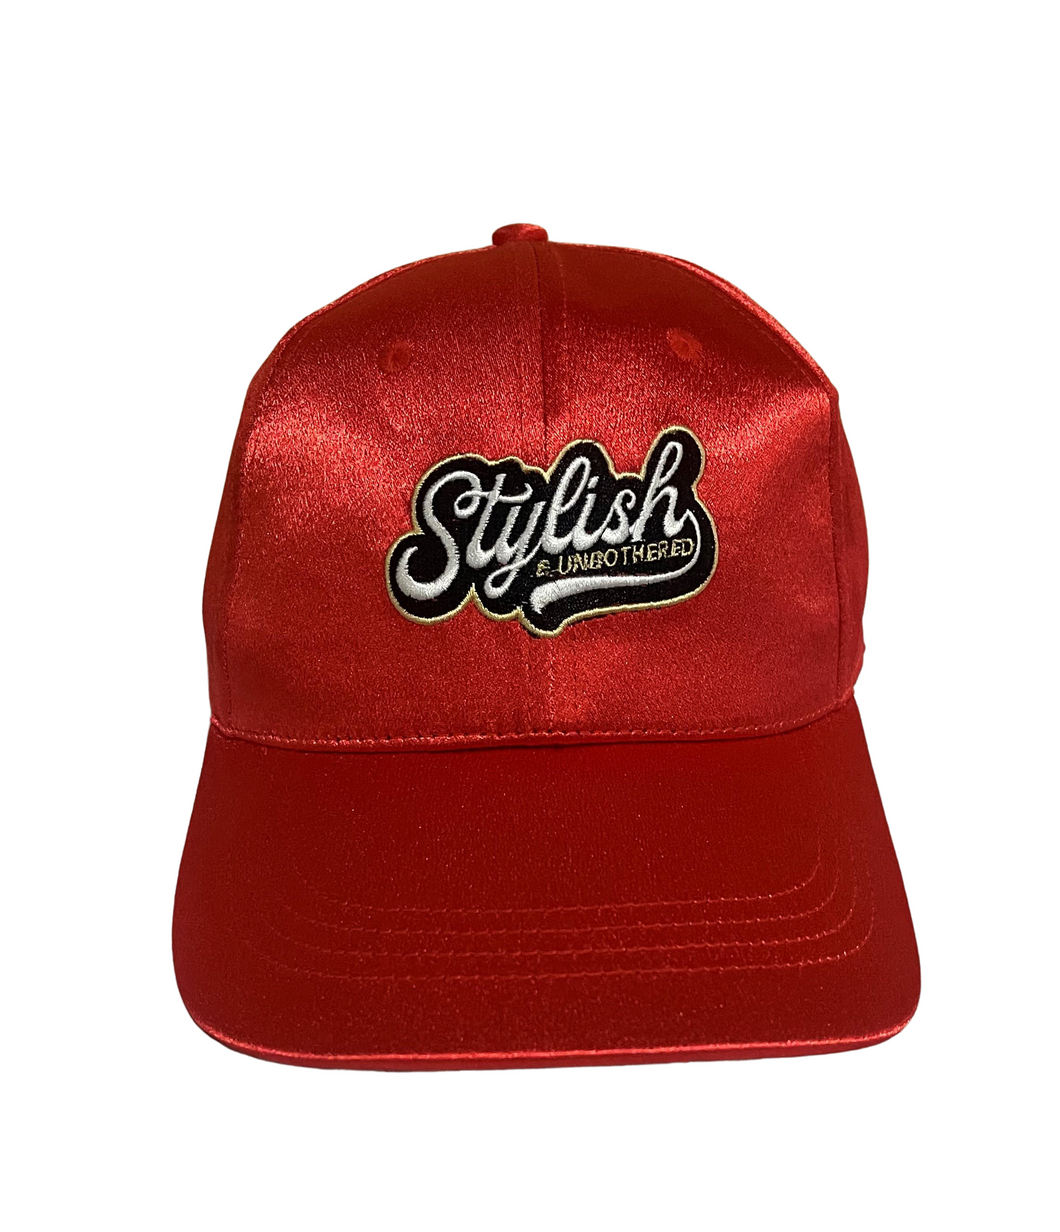 Red Satin Stylish and Unbothered Hat